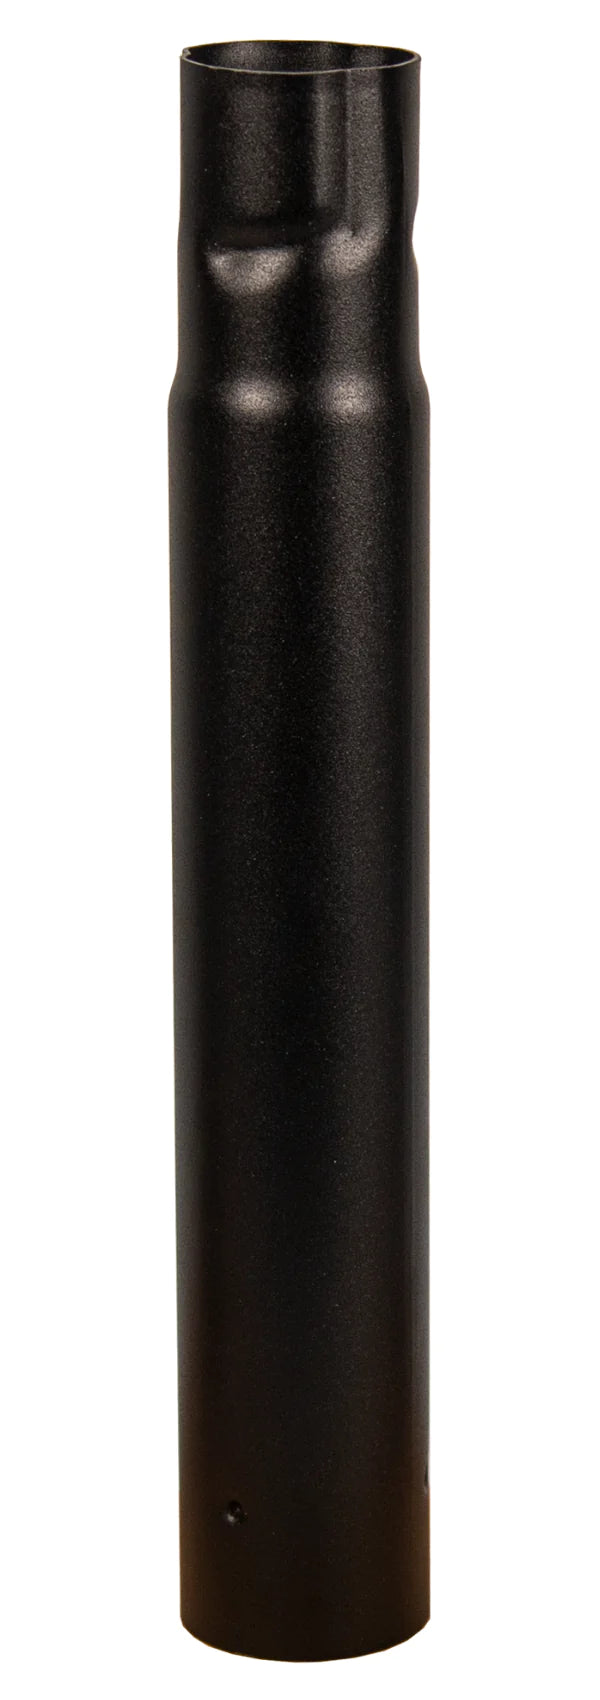 Squirrel Stopper Pole Extender for Black Deluxe